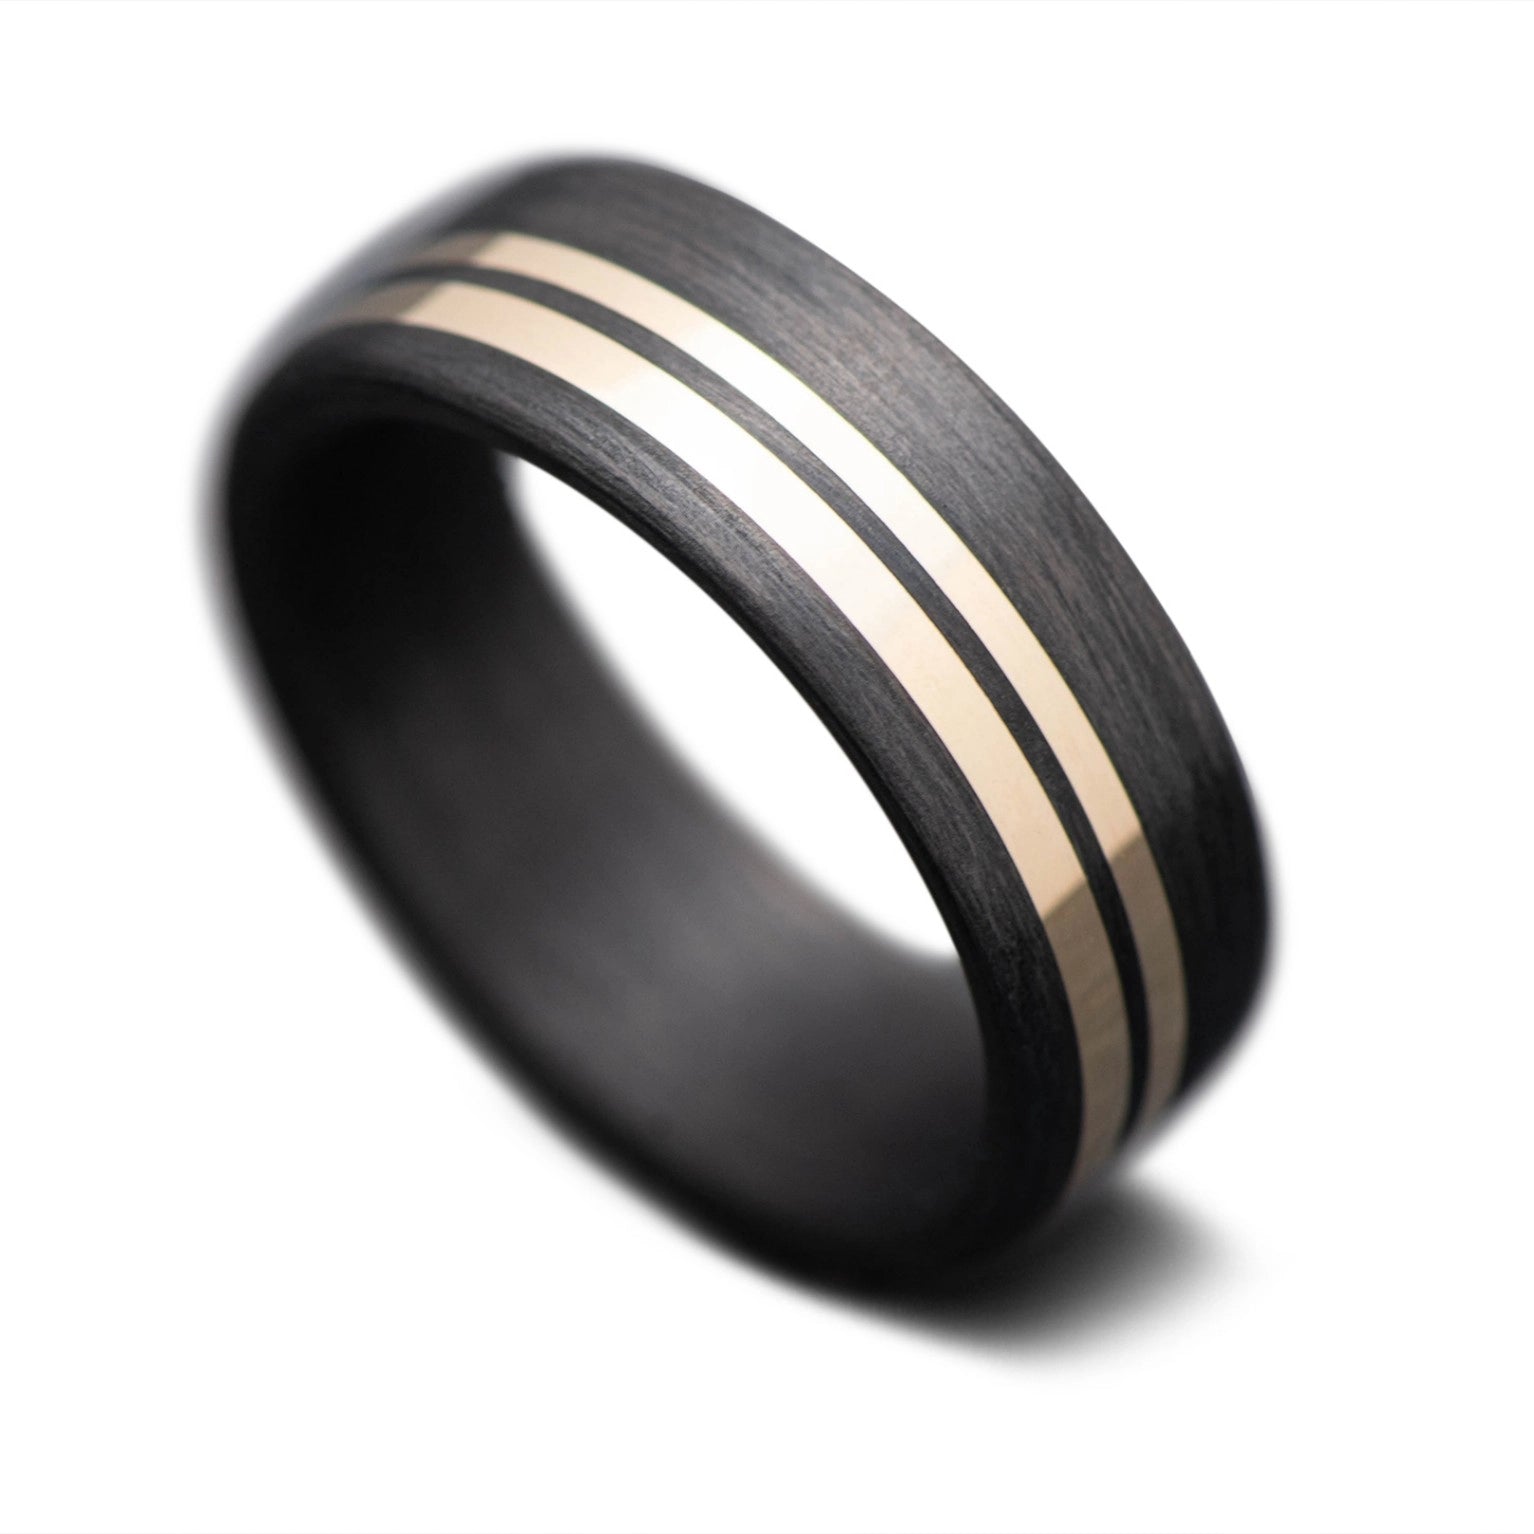 CarbonUni Core Ring with polished finish, 7mm -THE INNOVATOR